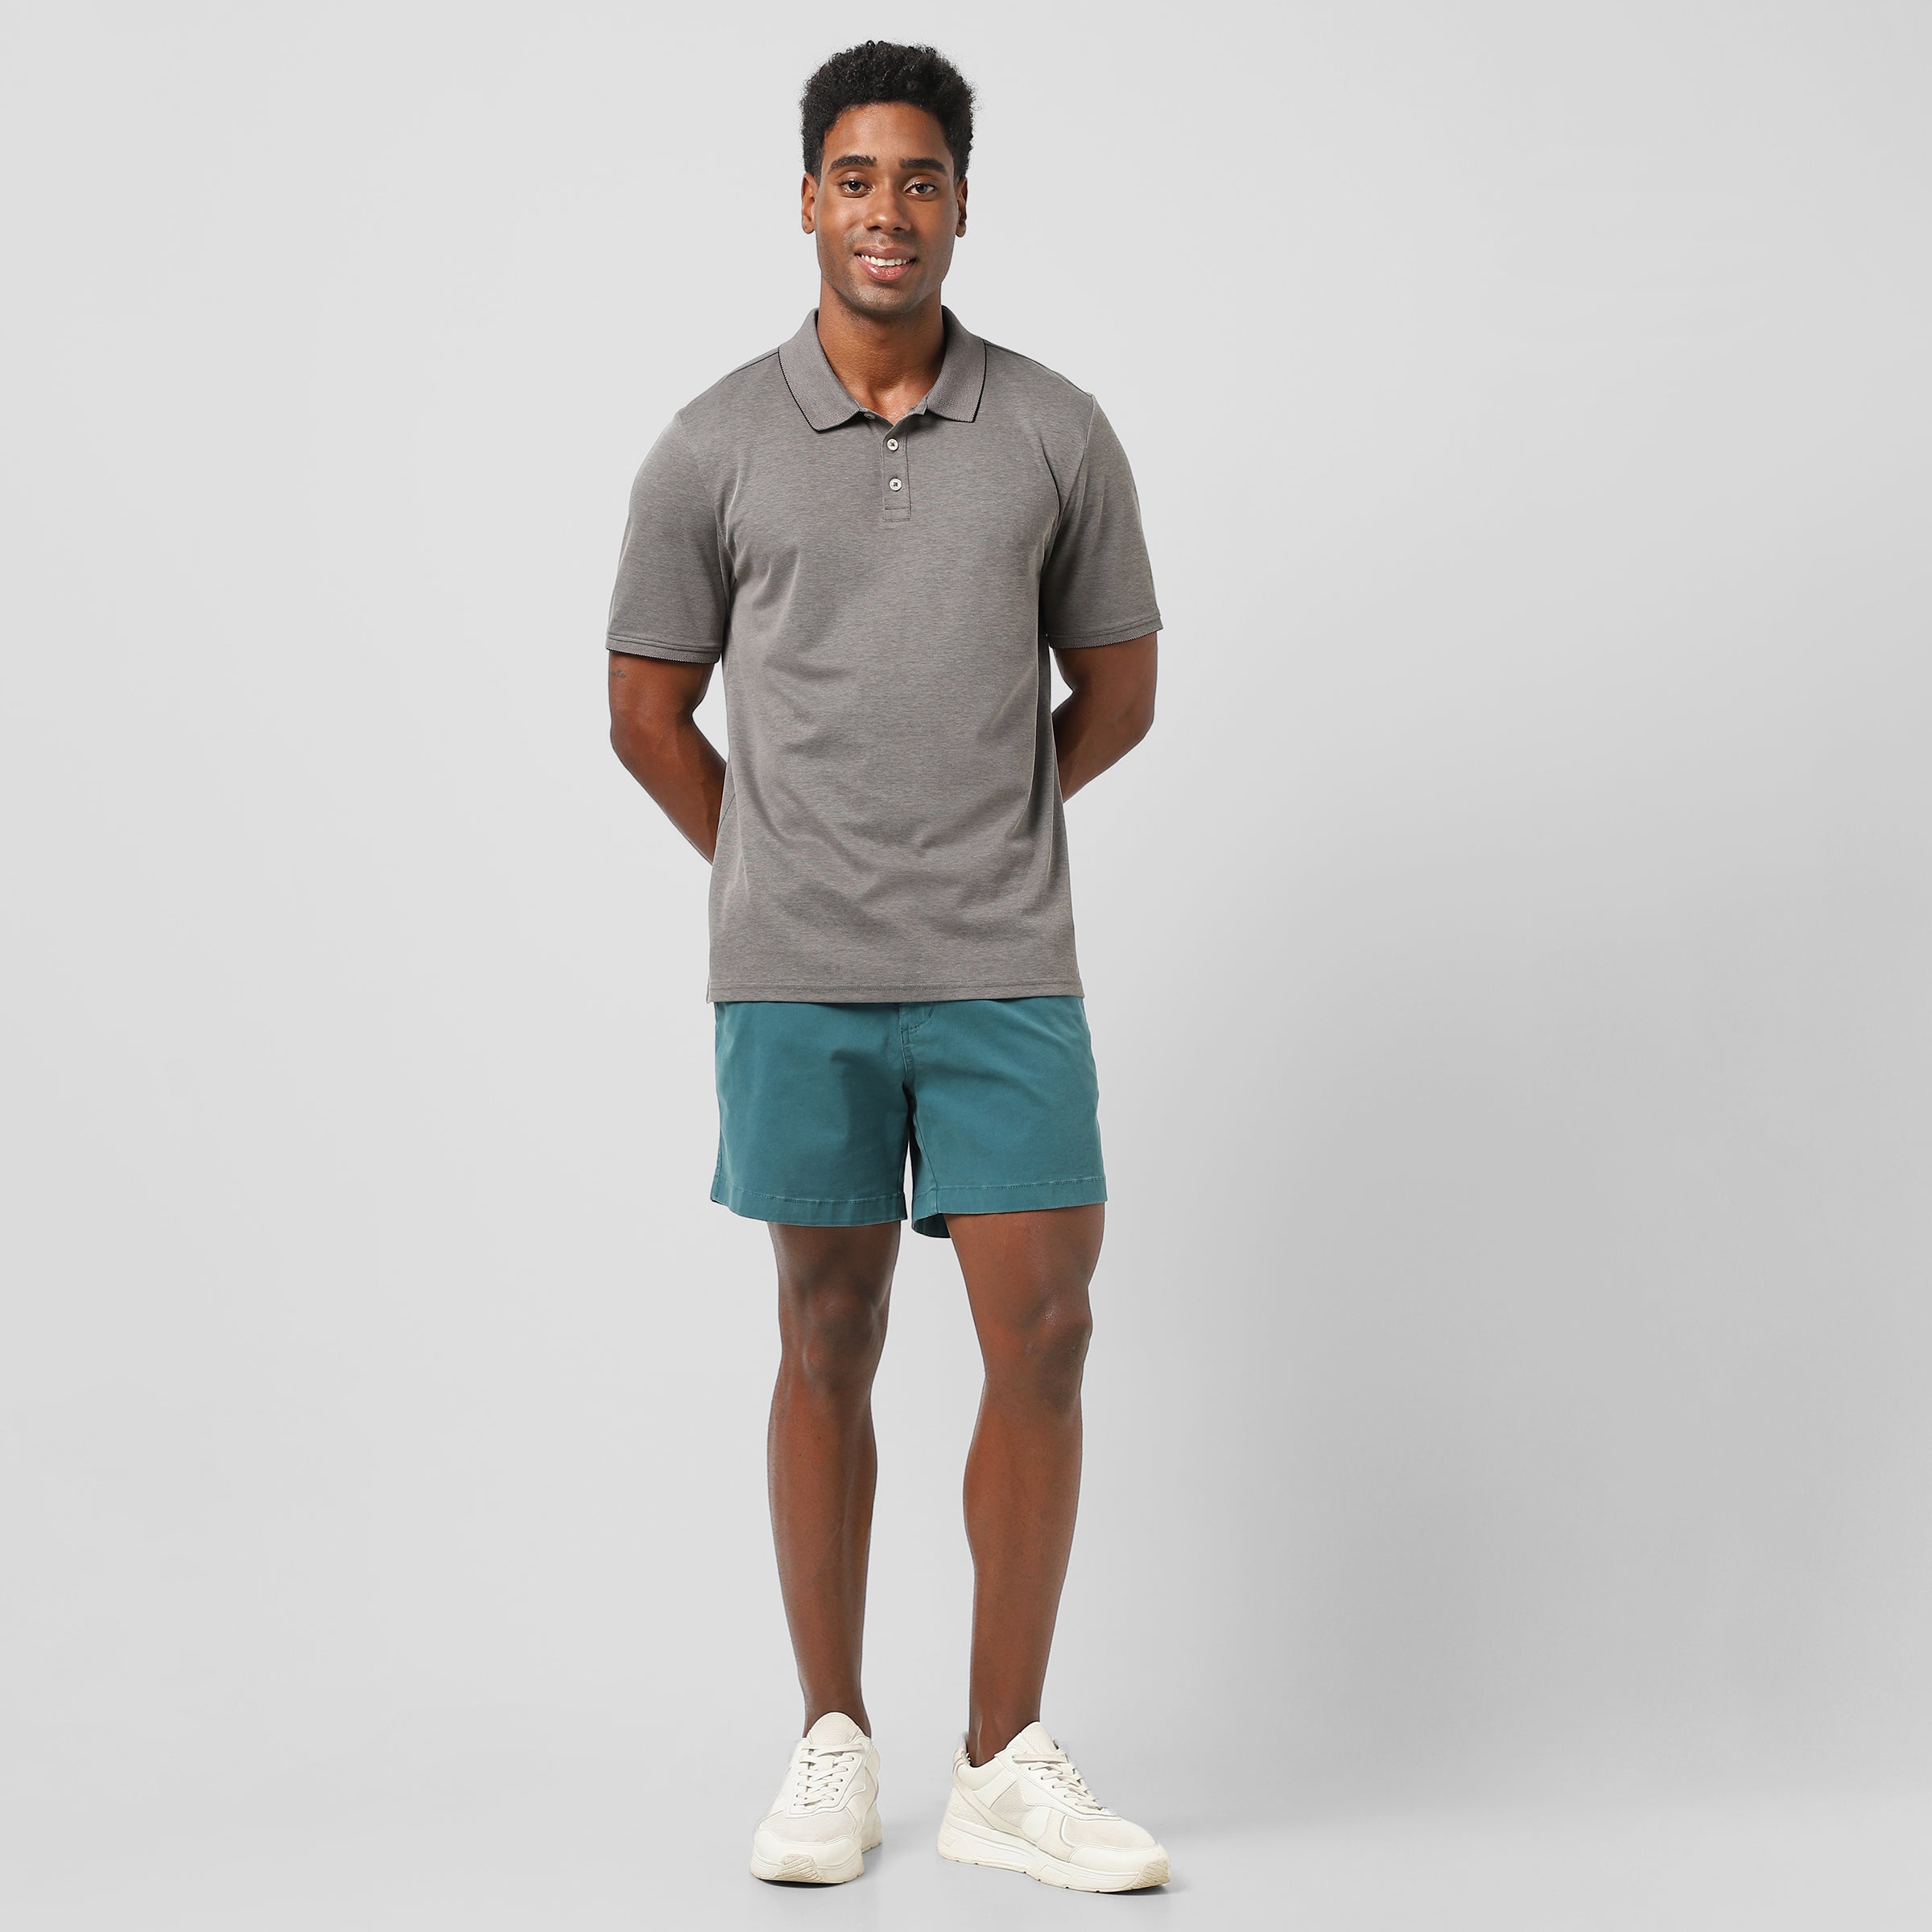 Range Polo Charcoal full body on model worn with Stretch Short Marine